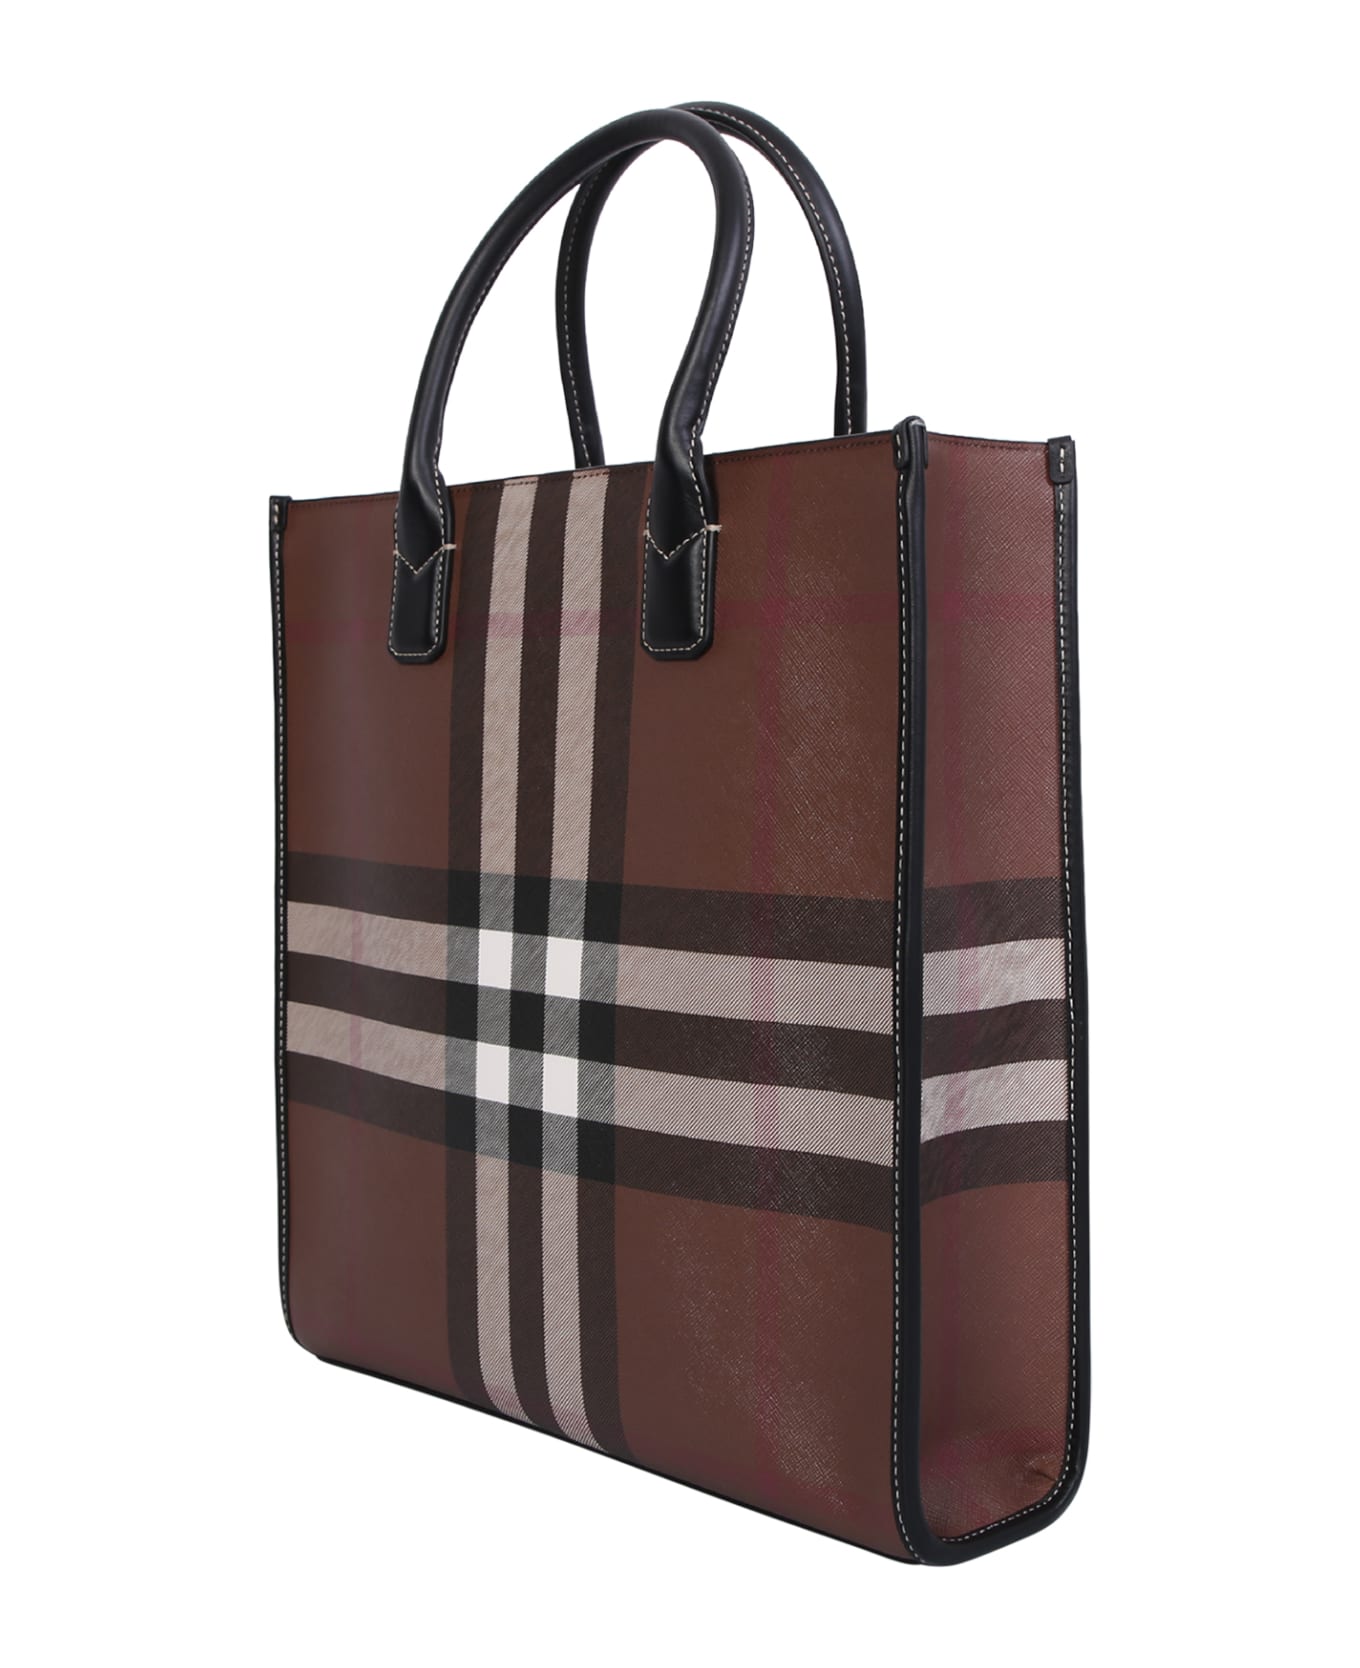 Burberry Tote Bag Denny - Brown トートバッグ